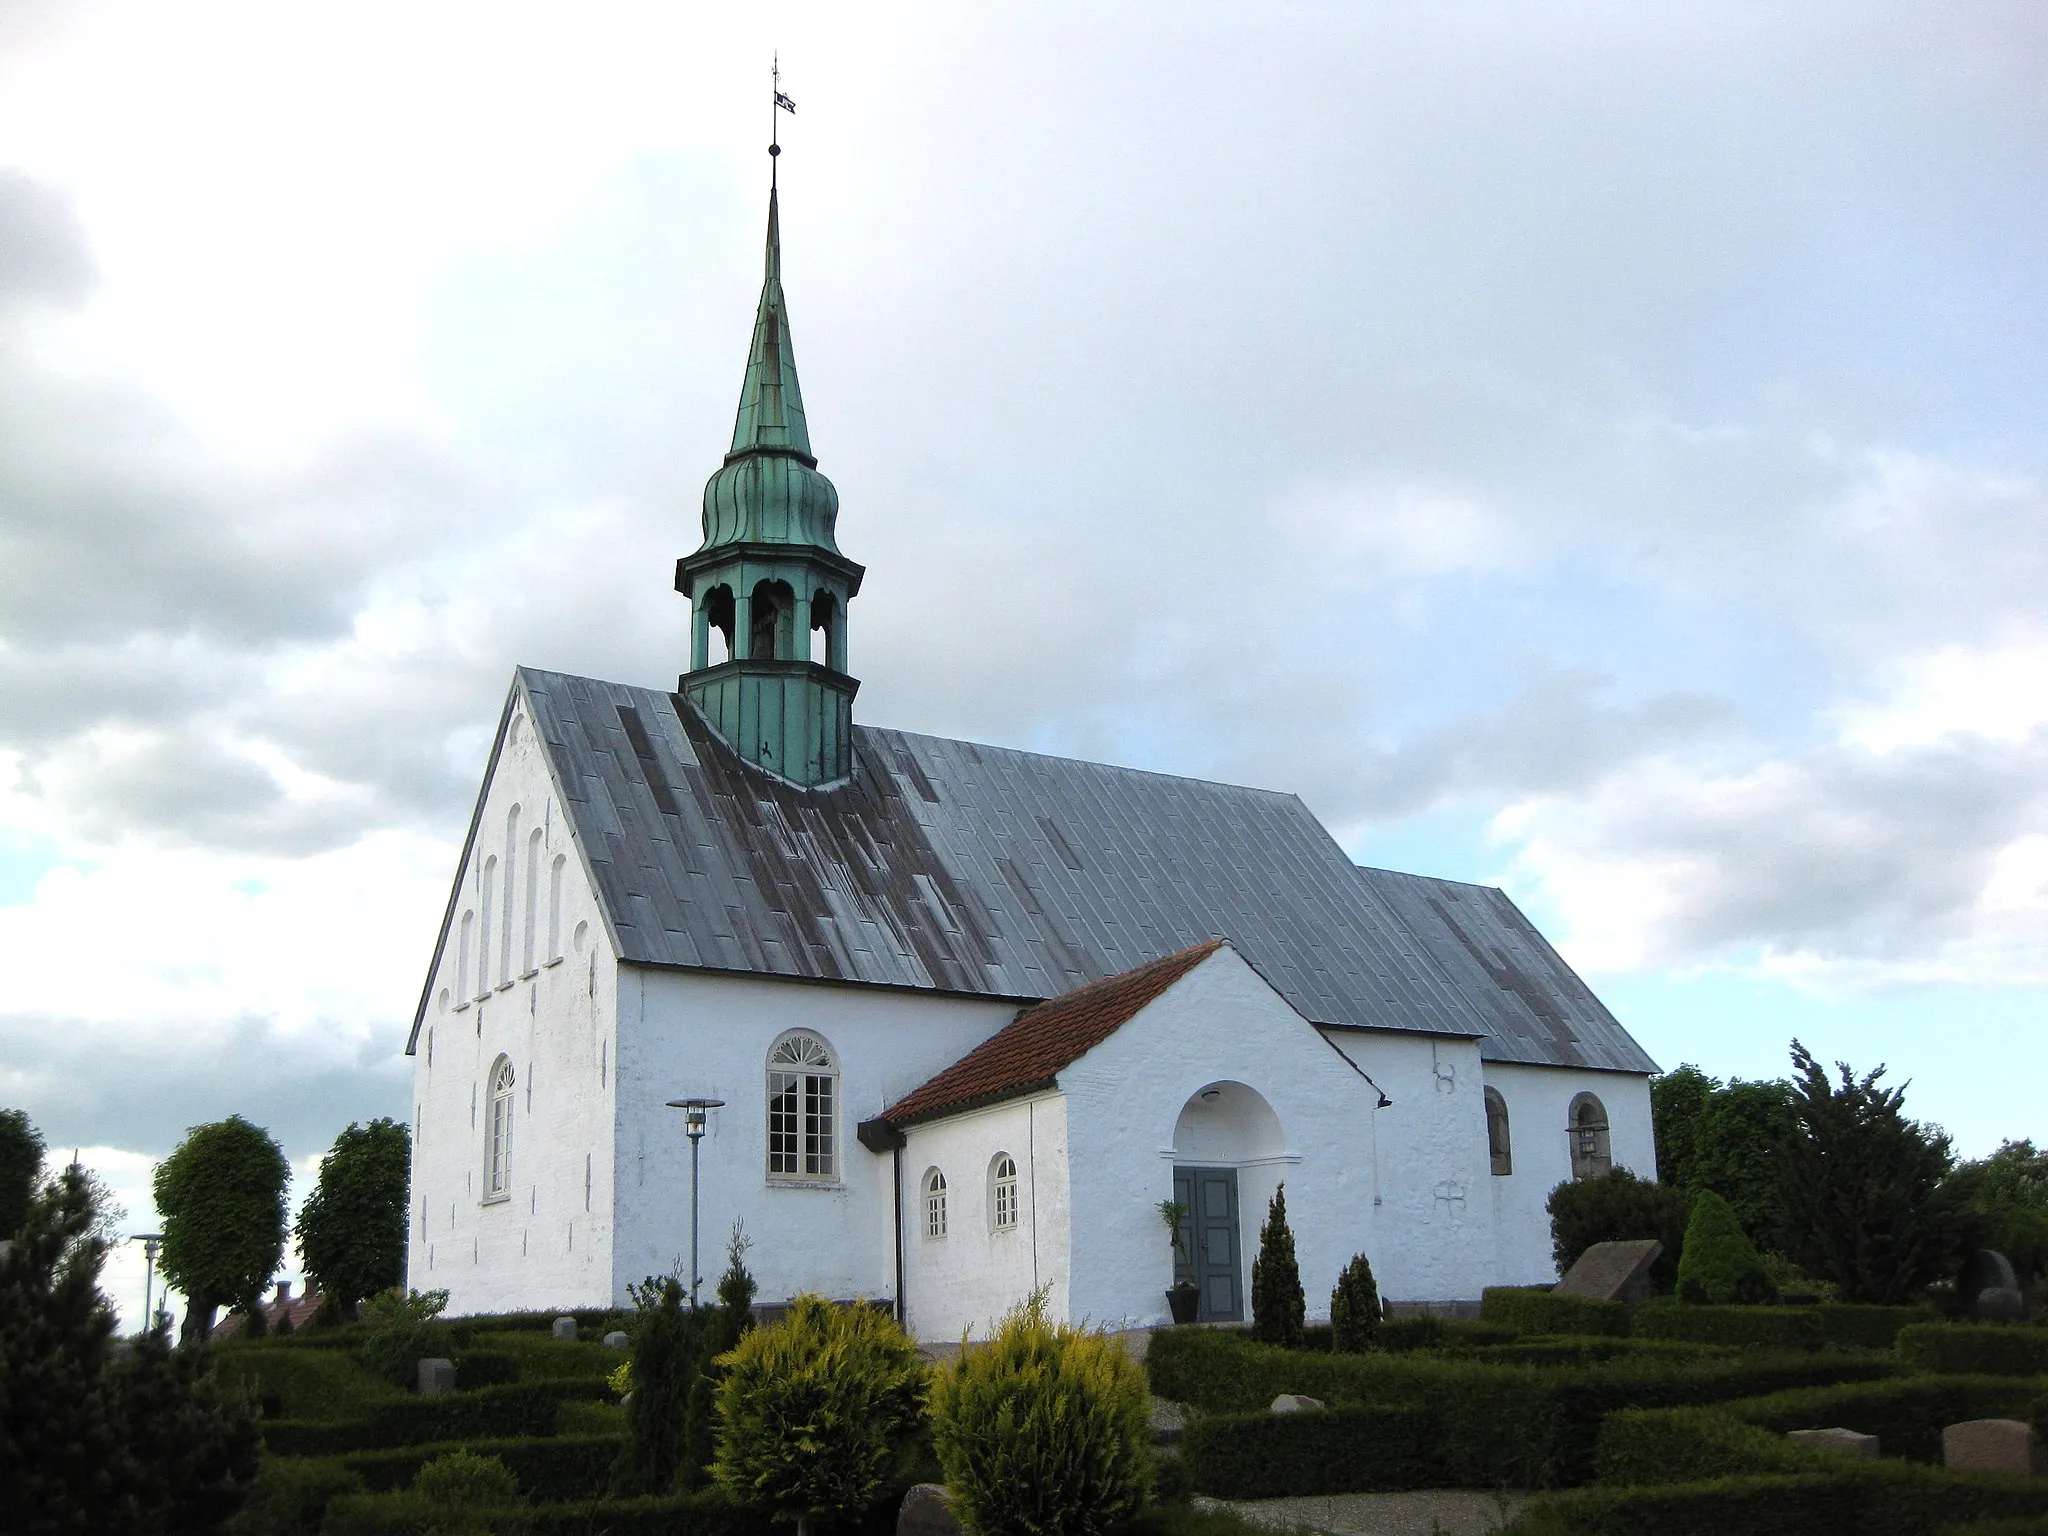 Photo showing: The church "Viuf Kirke" in the village "Viuf" north of Kolding. The village is located in South-Central Jutland, Denmark.